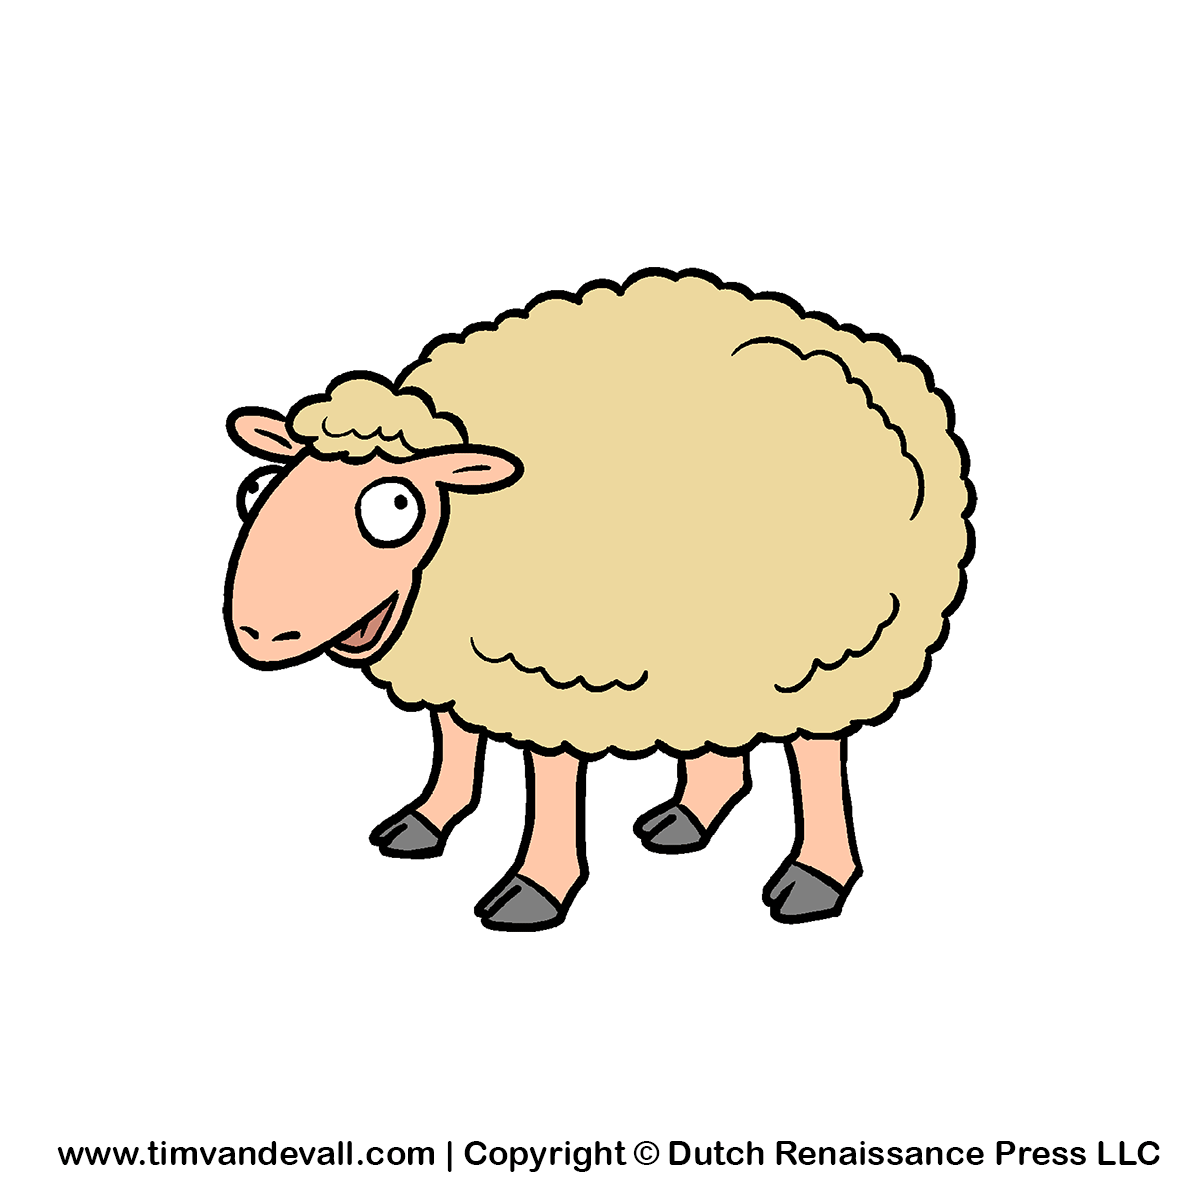 Cartoon sheep on the meadow vector clipart free clip art images